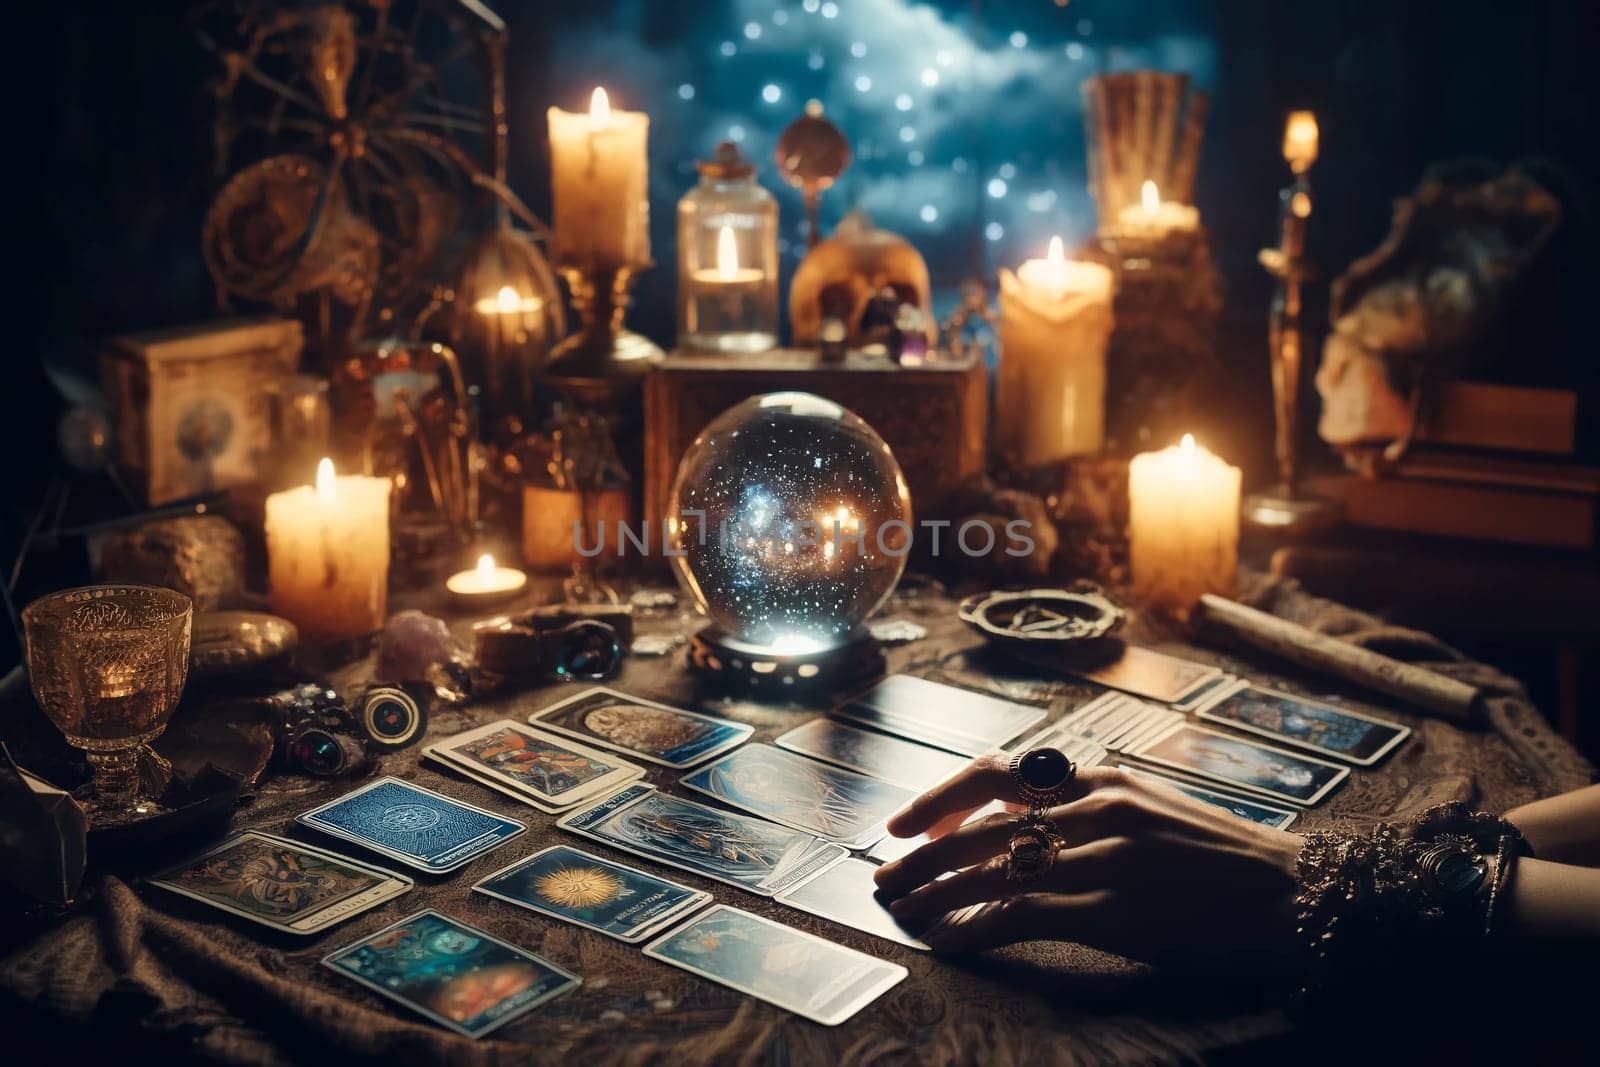 Fortune telling with Tarot cards in a mystical setting with burning candles.